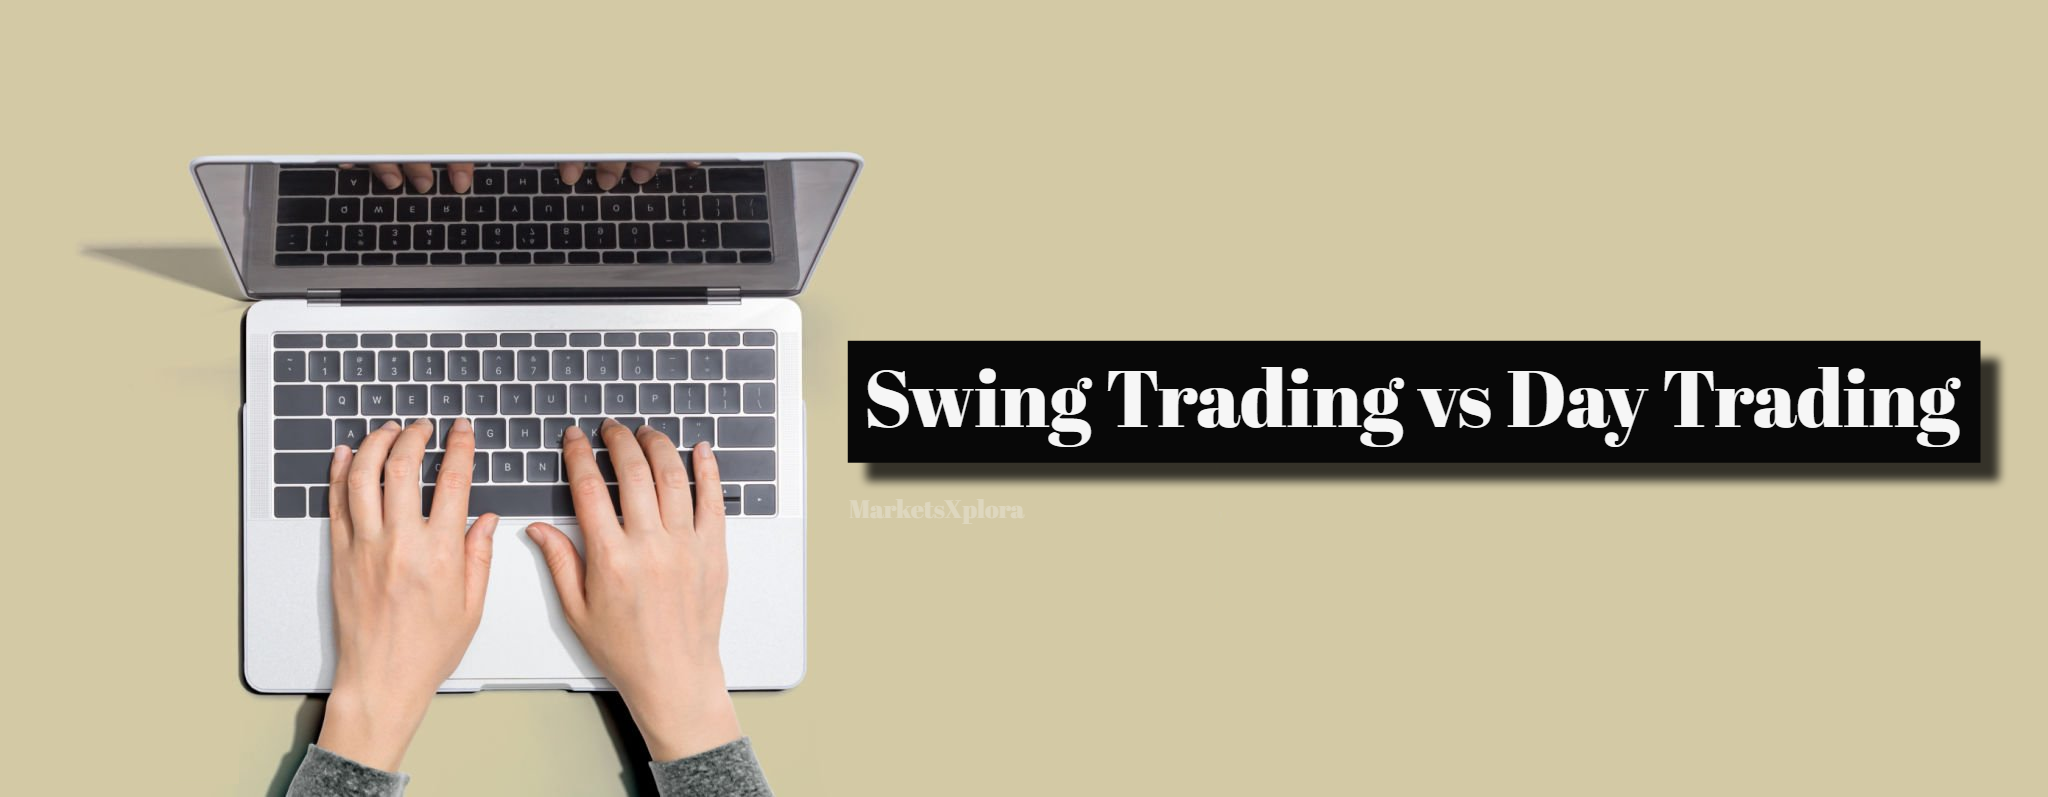 Compare Day Trading vs Swing Trading to decide which approach best fits your lifestyle, personality and goals. Our guide examines all the key considerations.